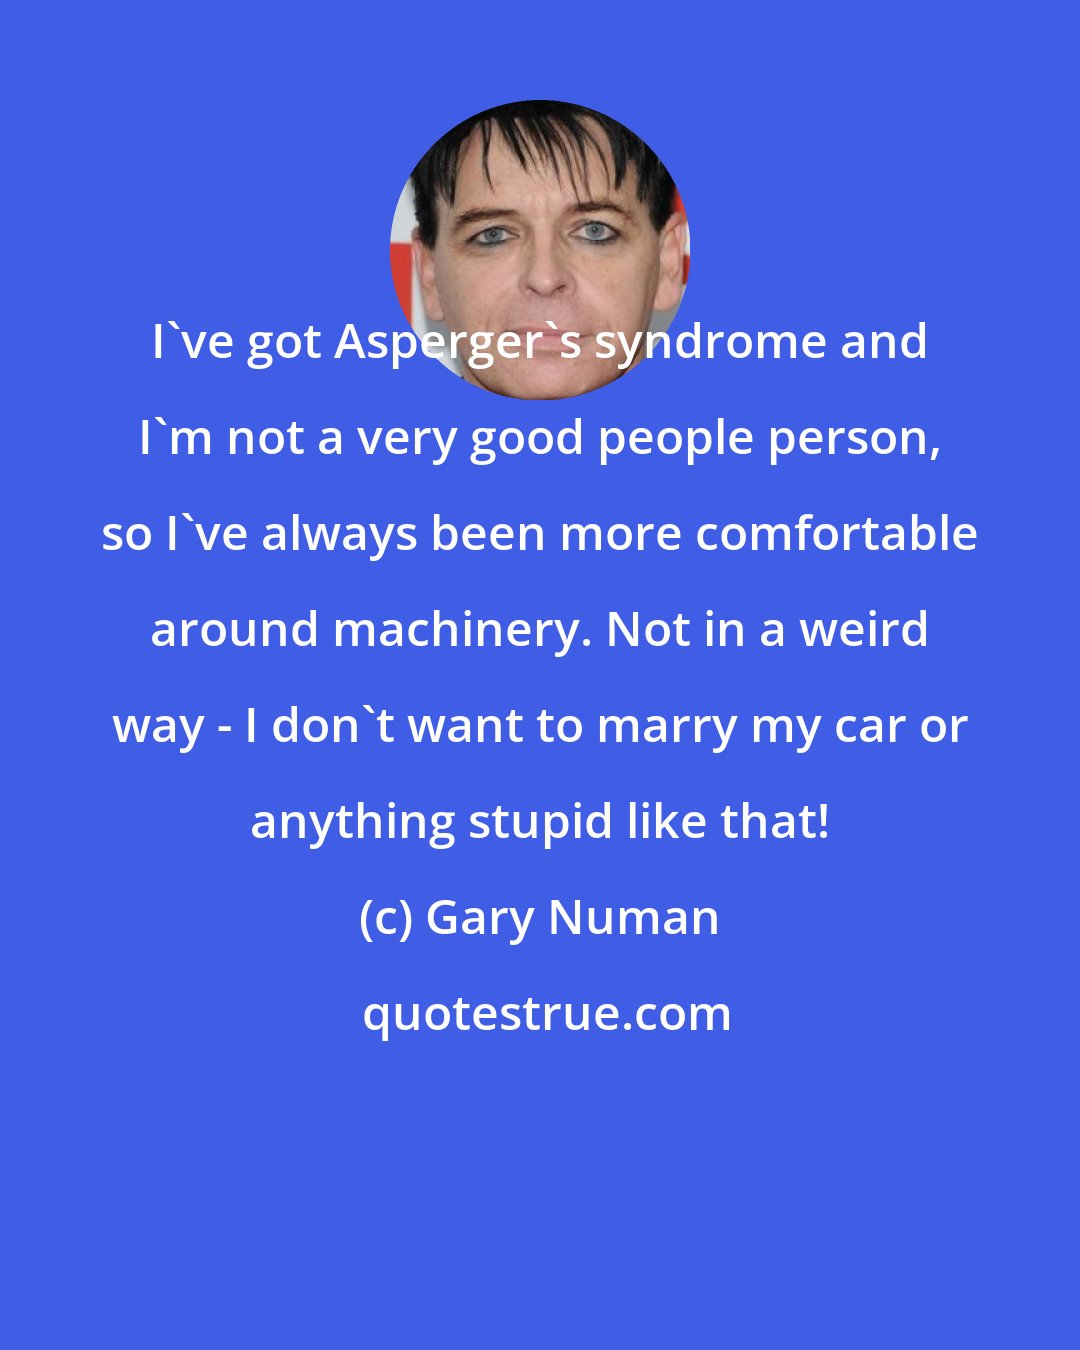 Gary Numan: I've got Asperger's syndrome and I'm not a very good people person, so I've always been more comfortable around machinery. Not in a weird way - I don't want to marry my car or anything stupid like that!